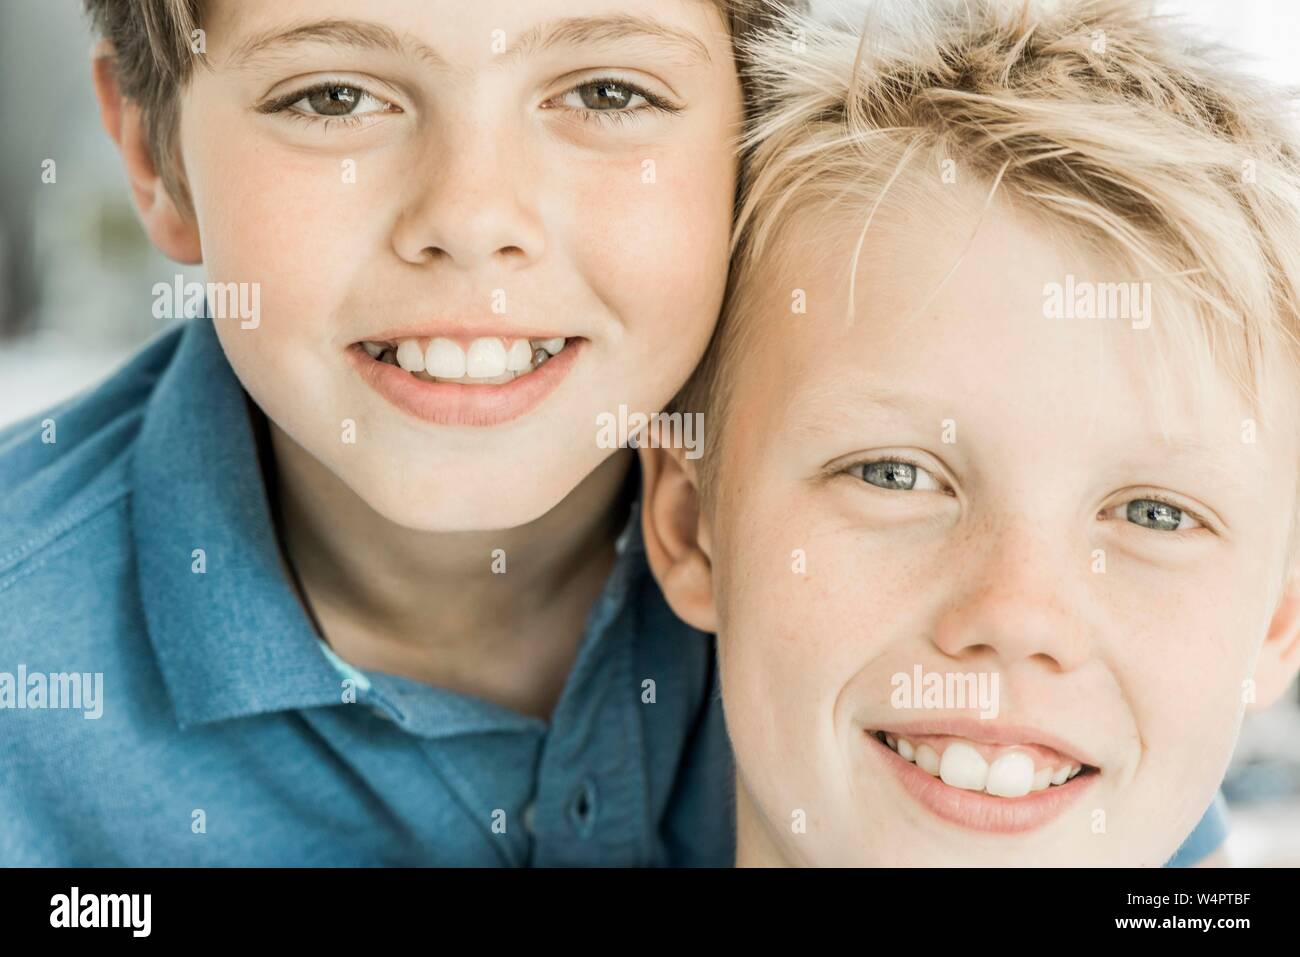 Two boys, friends, 10 years old, looking smiling into the camera, Portraits, Germany Stock Photo